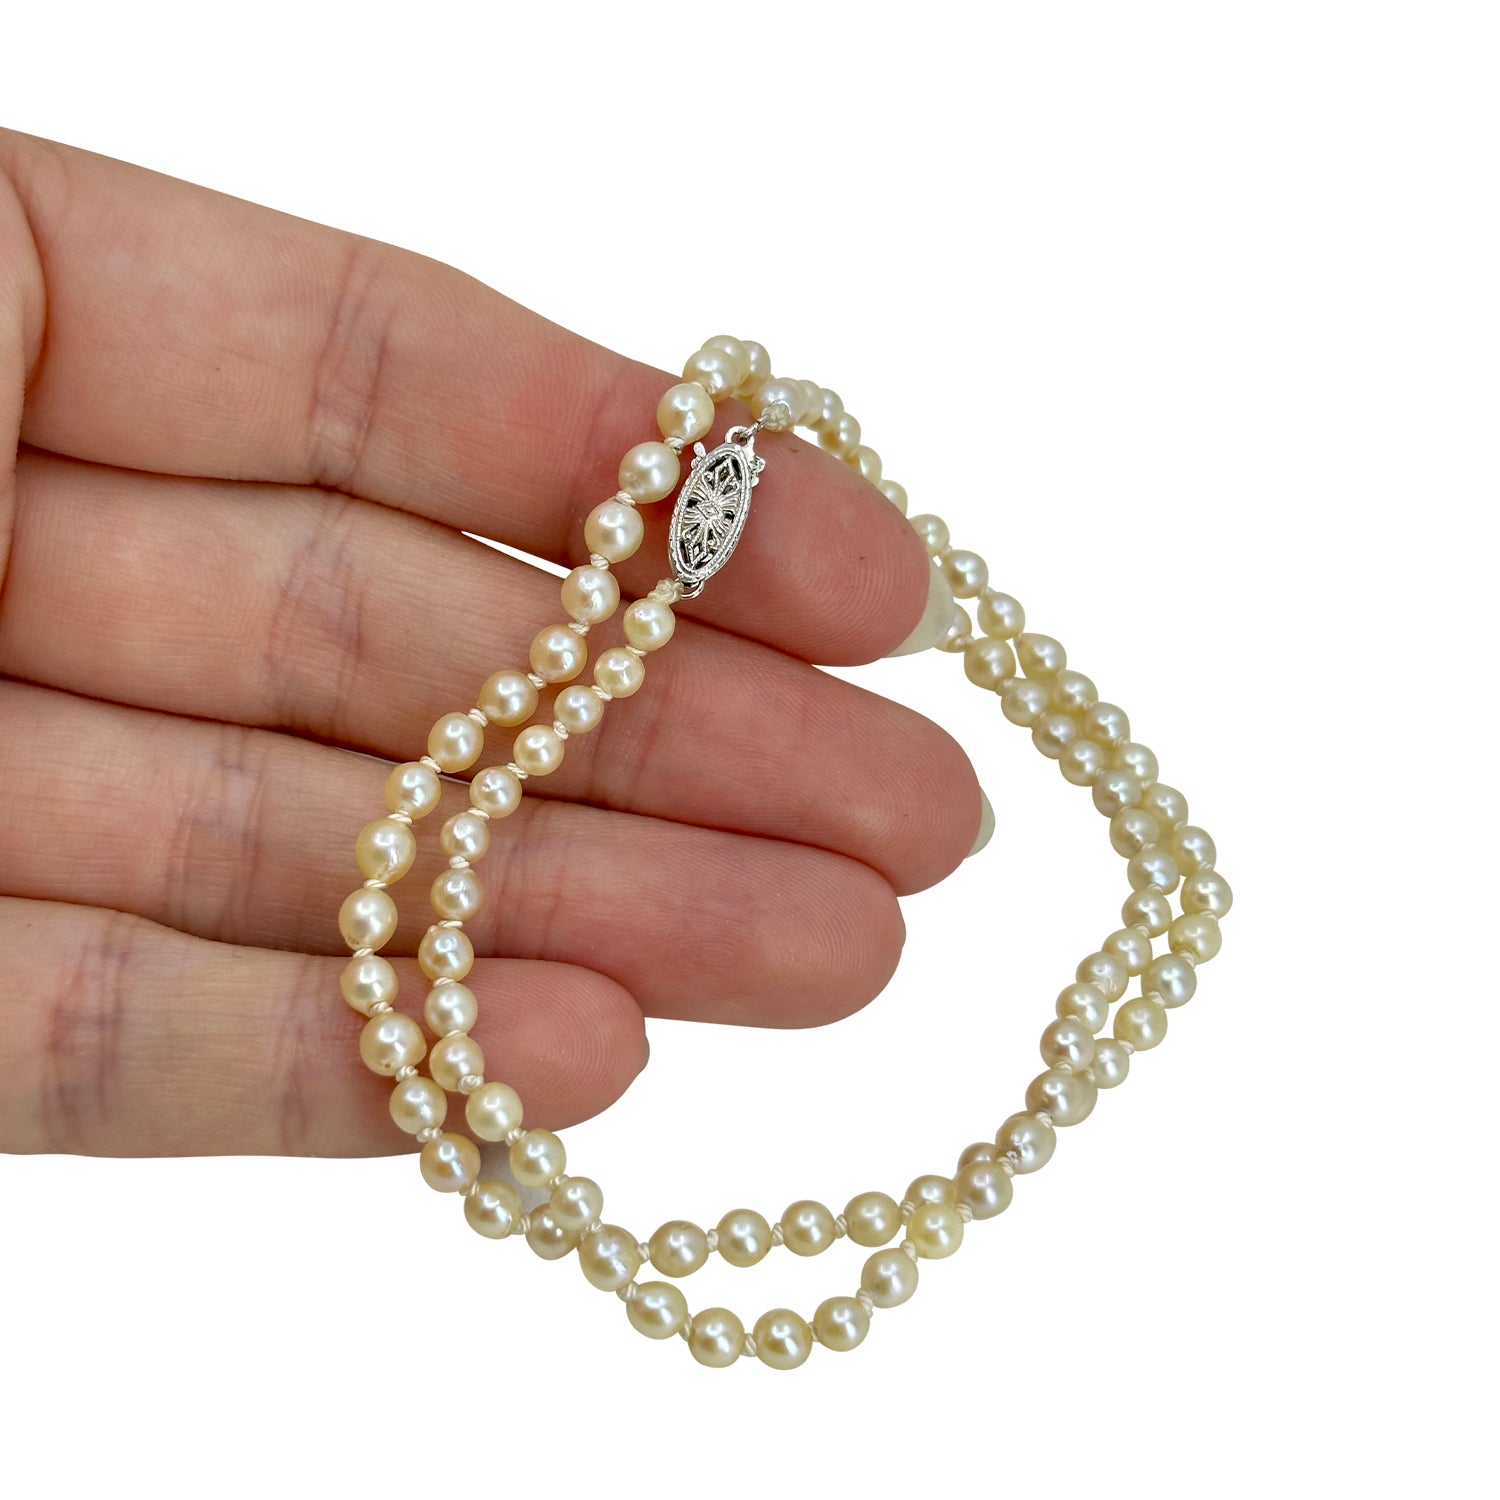 Petite Retro Japanese Saltwater Cultured Akoya Pearl Vintage Necklace - 10K White Gold 16.25 Inch